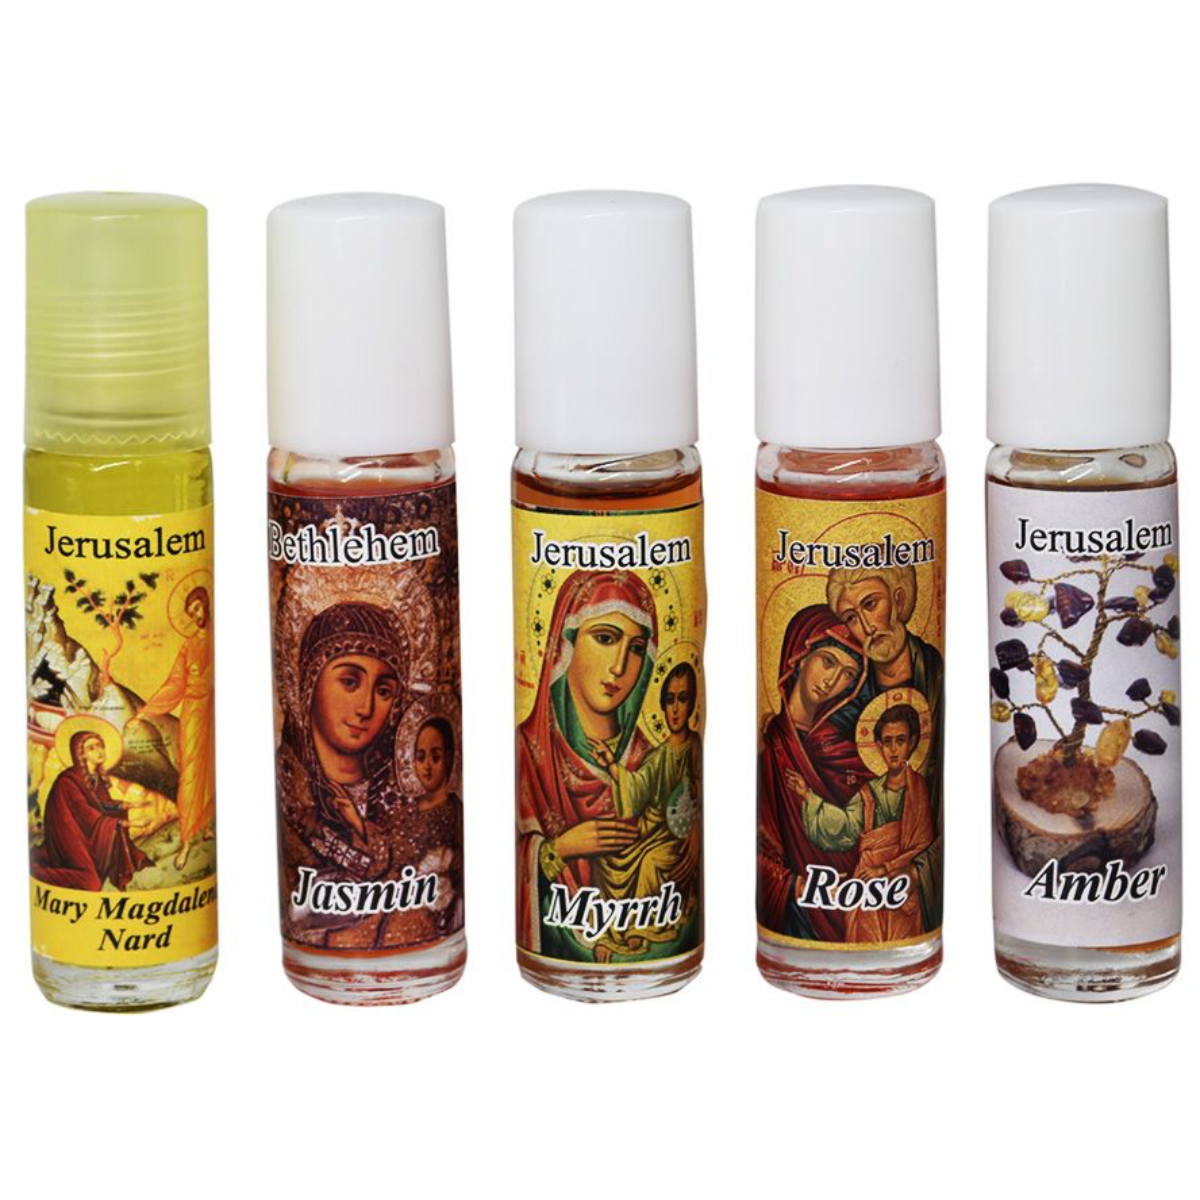 Lot of 5 Mix Anointing Oil in Roll On Bottles 10 ml. from Jerusalem